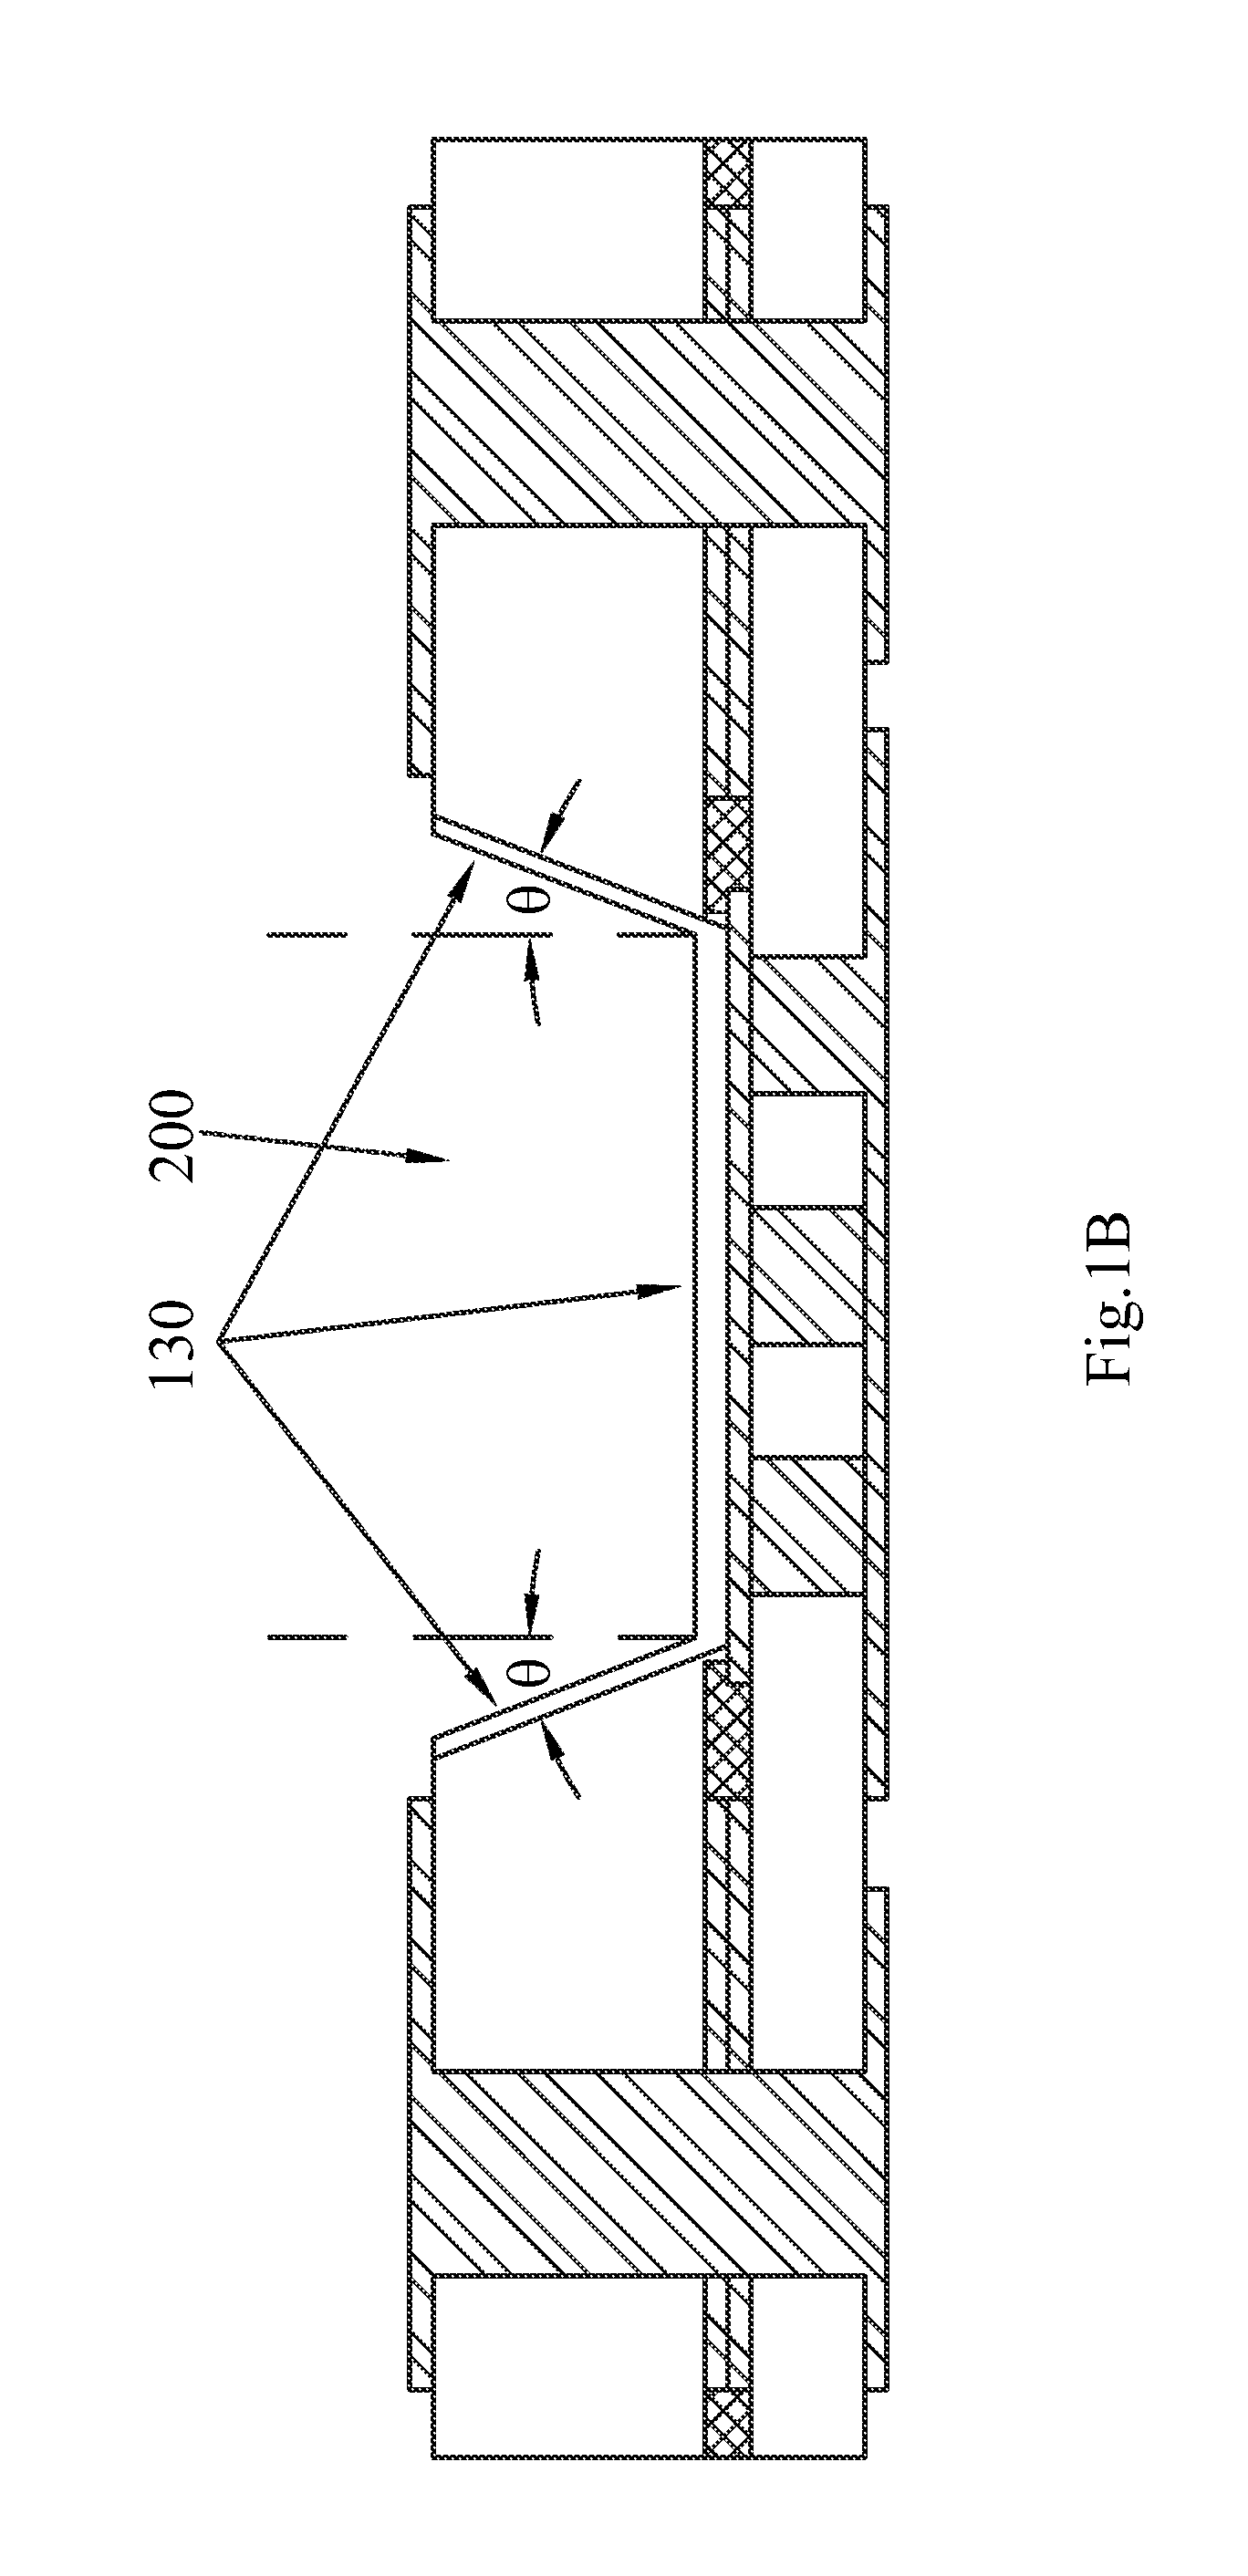 Substrate Structure of LED (light emitting diode) Packaging and Method of the same